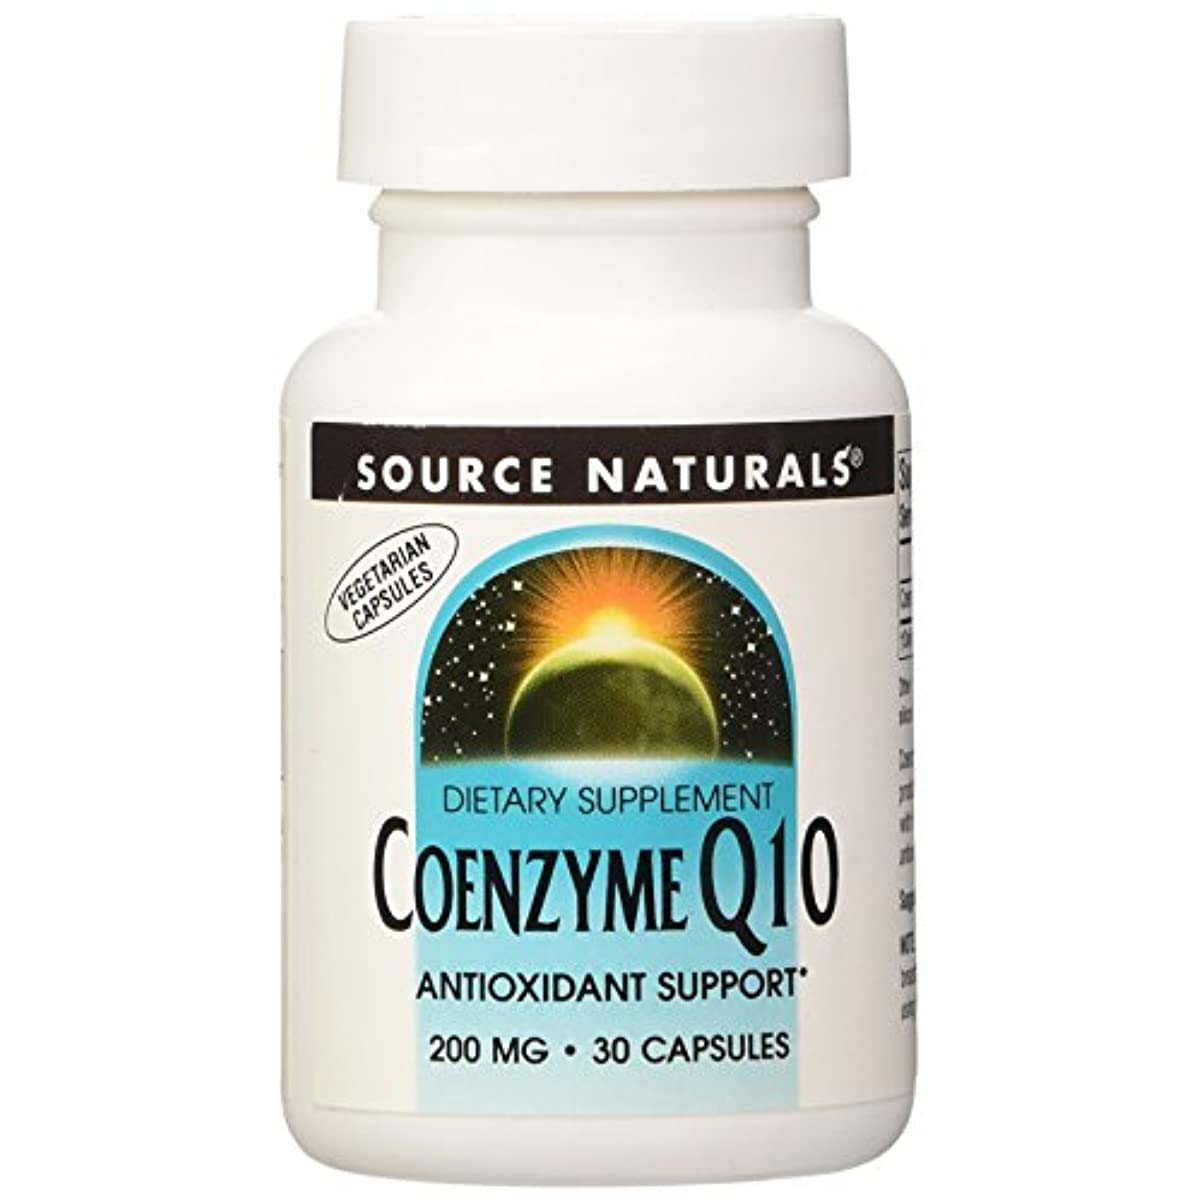 Source Naturals Coenzyme Q10, 200 mg, 30 Capsules